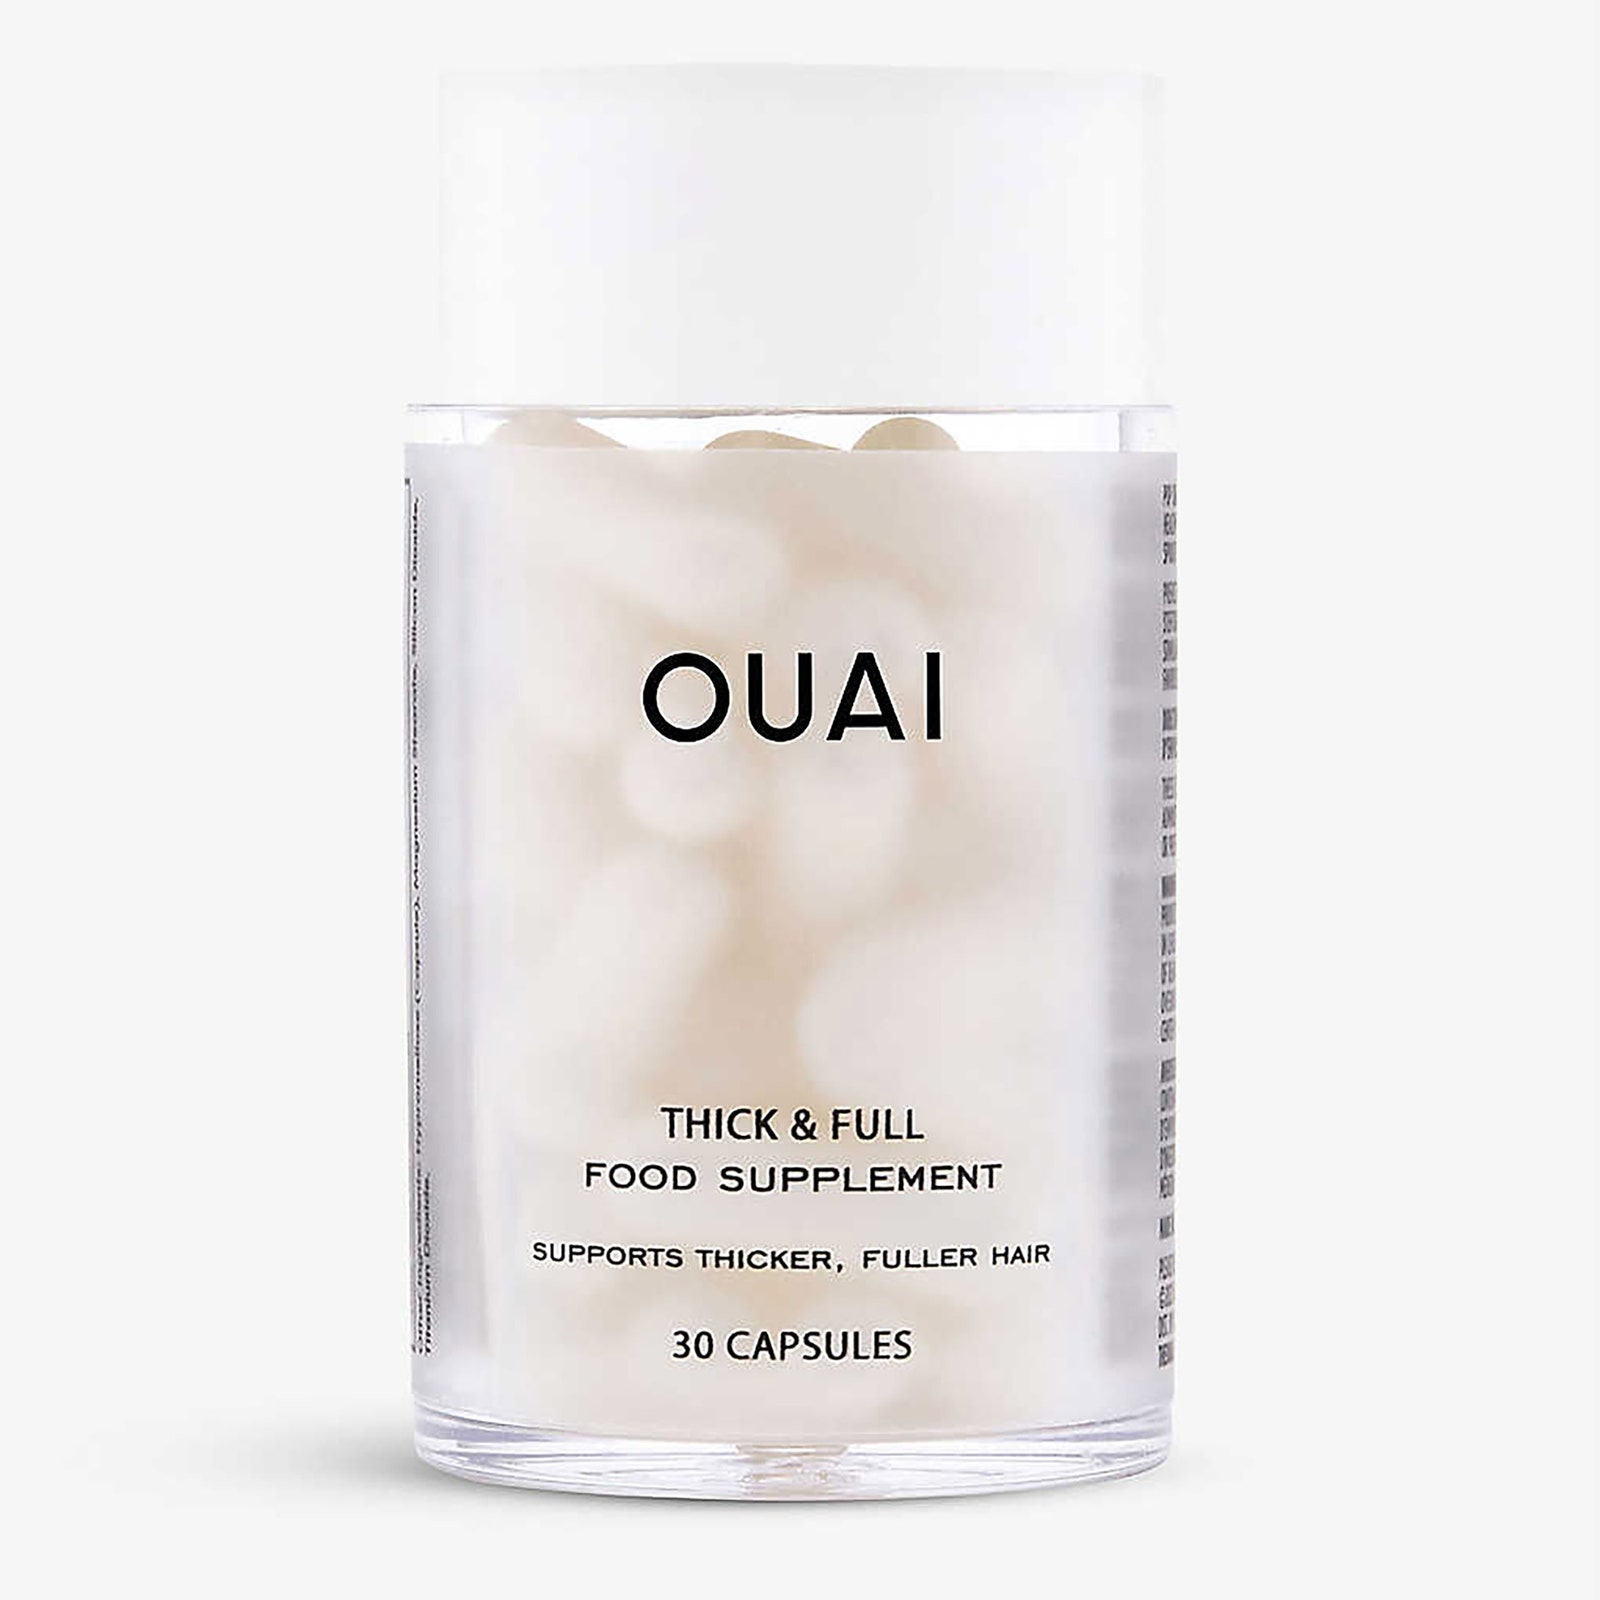 Ouai Thick amp Full Supplement 36 Cult Beauty